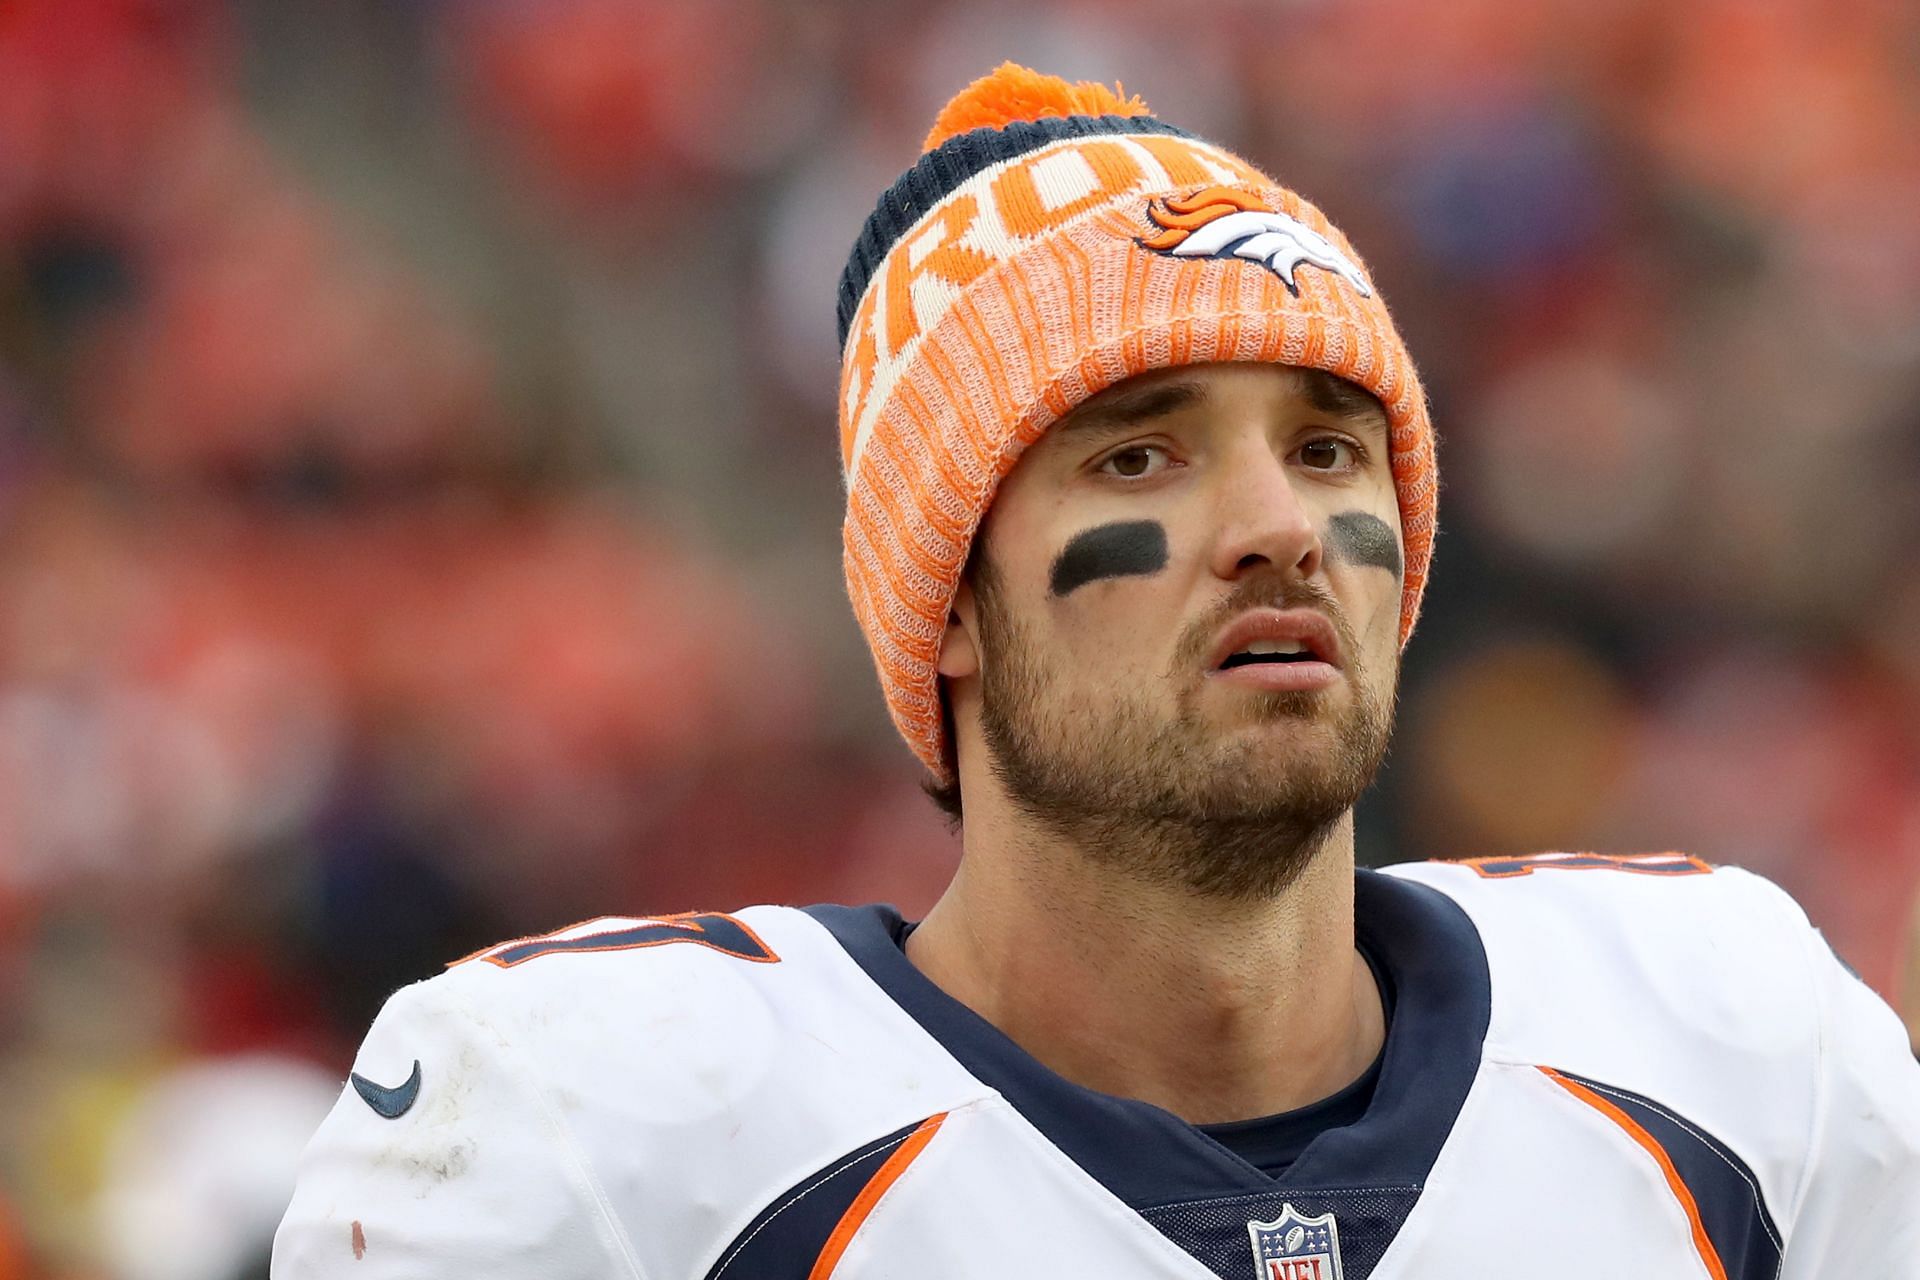 Brock Osweiler struggled to live up the expectations placed on him with the Denver Broncos